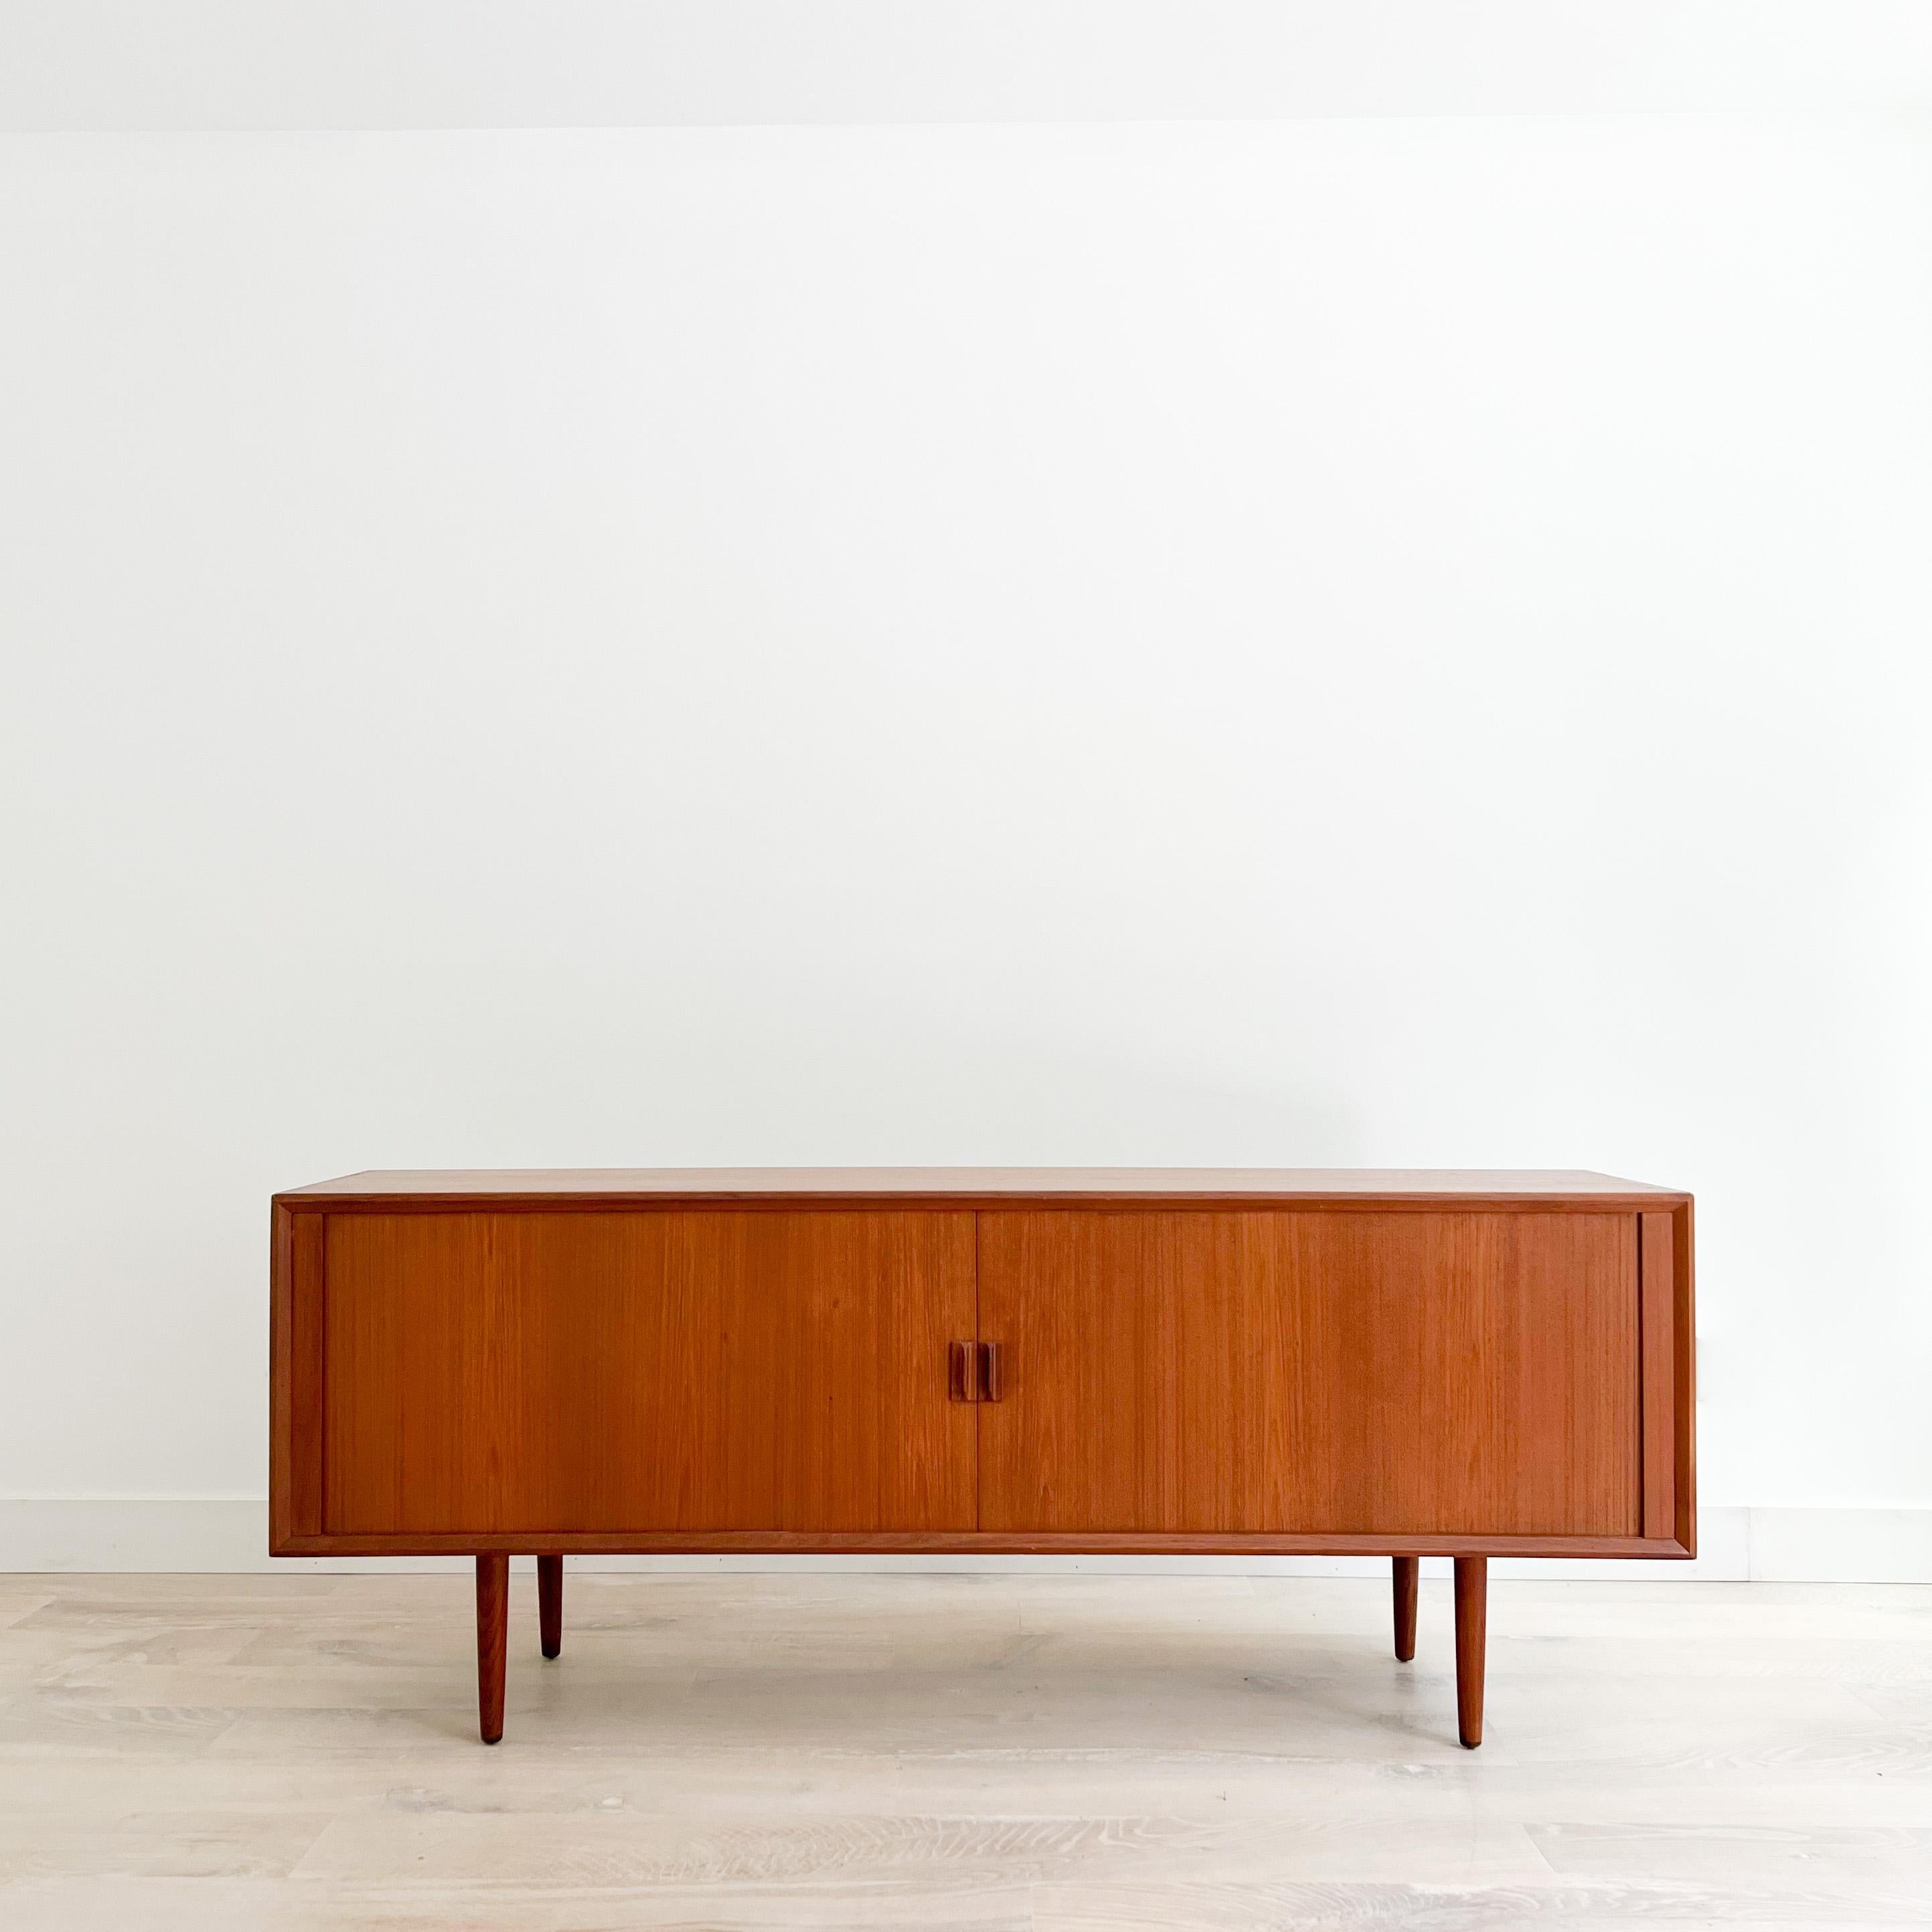 Mid-Century Modern long danish teak credenza with tambour doors on tapered legs. Designed by Svend Aage Larsen. Some light scuffing/scratching from age appropriate wear. The tambour doors open and close with ease. Very slight raised area in the